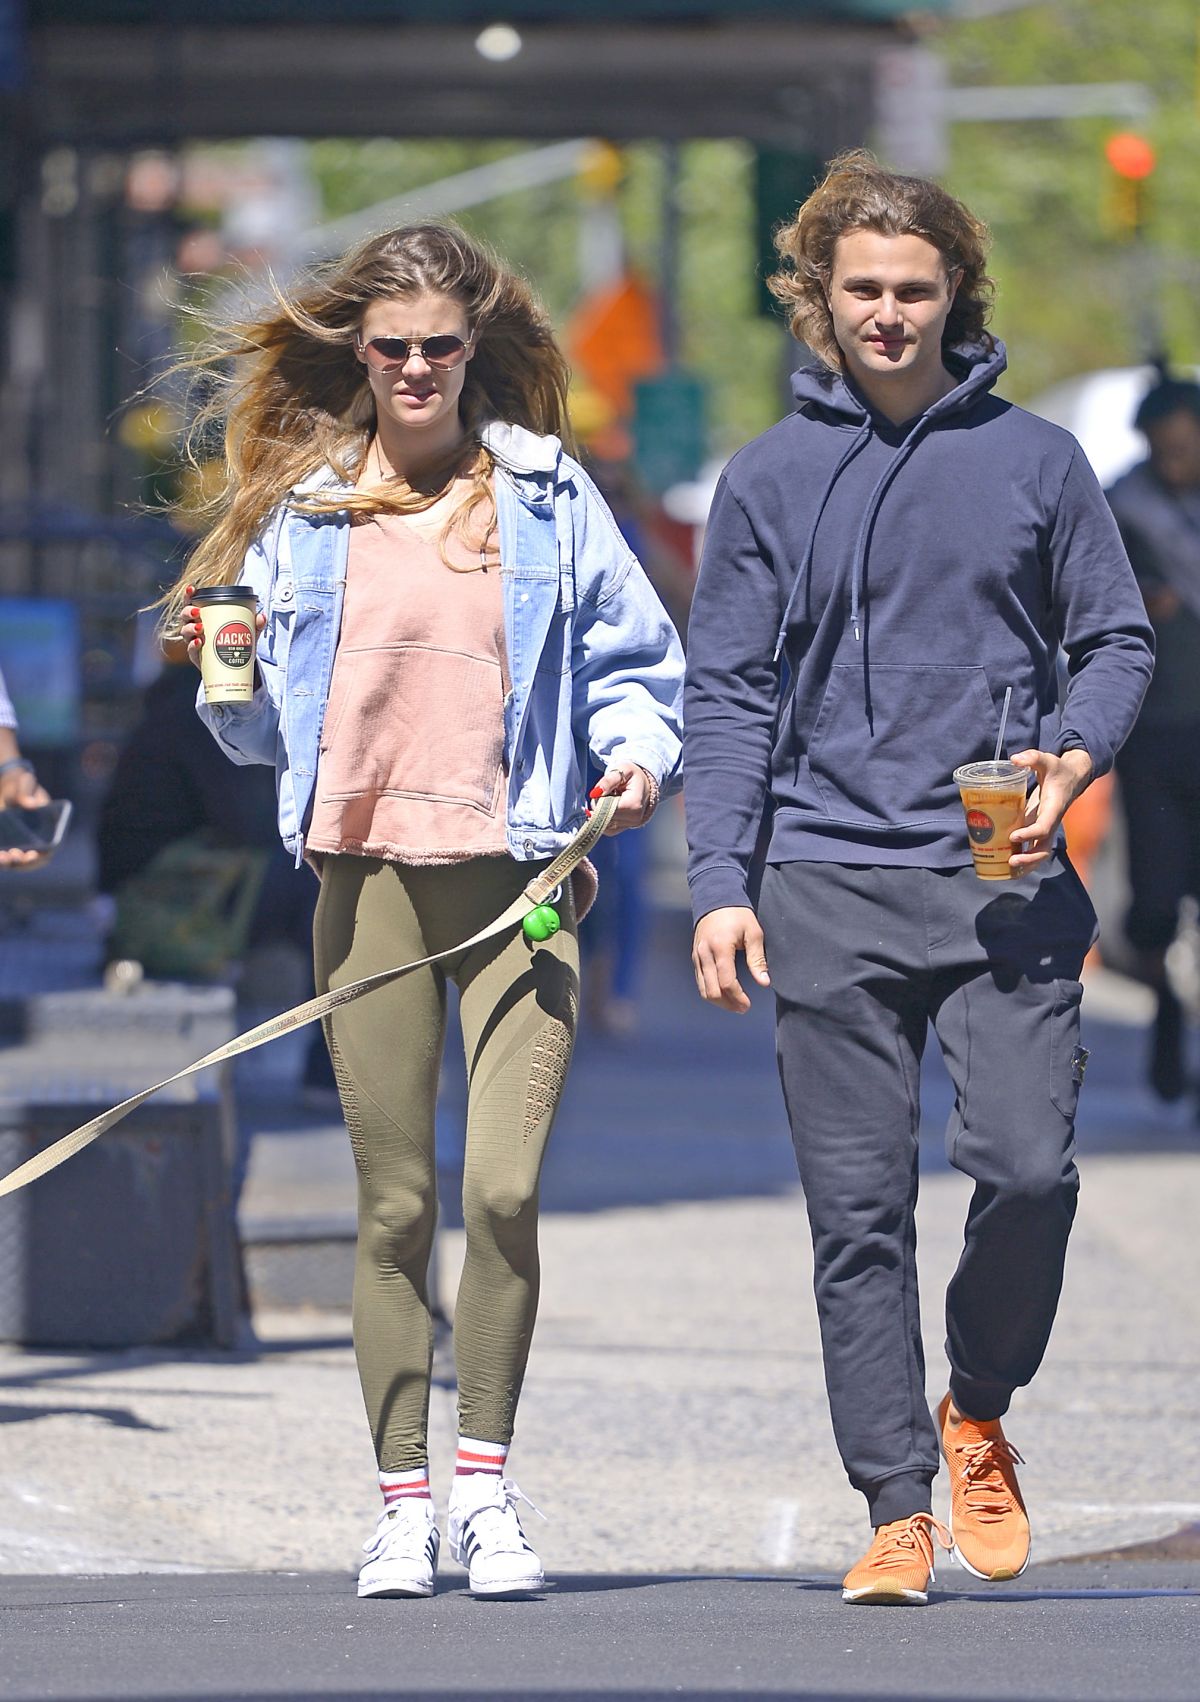 nina-agdal-and-jack-brinkley-with-their-dog-out-in-new-york-04-24-2019-2.jpg